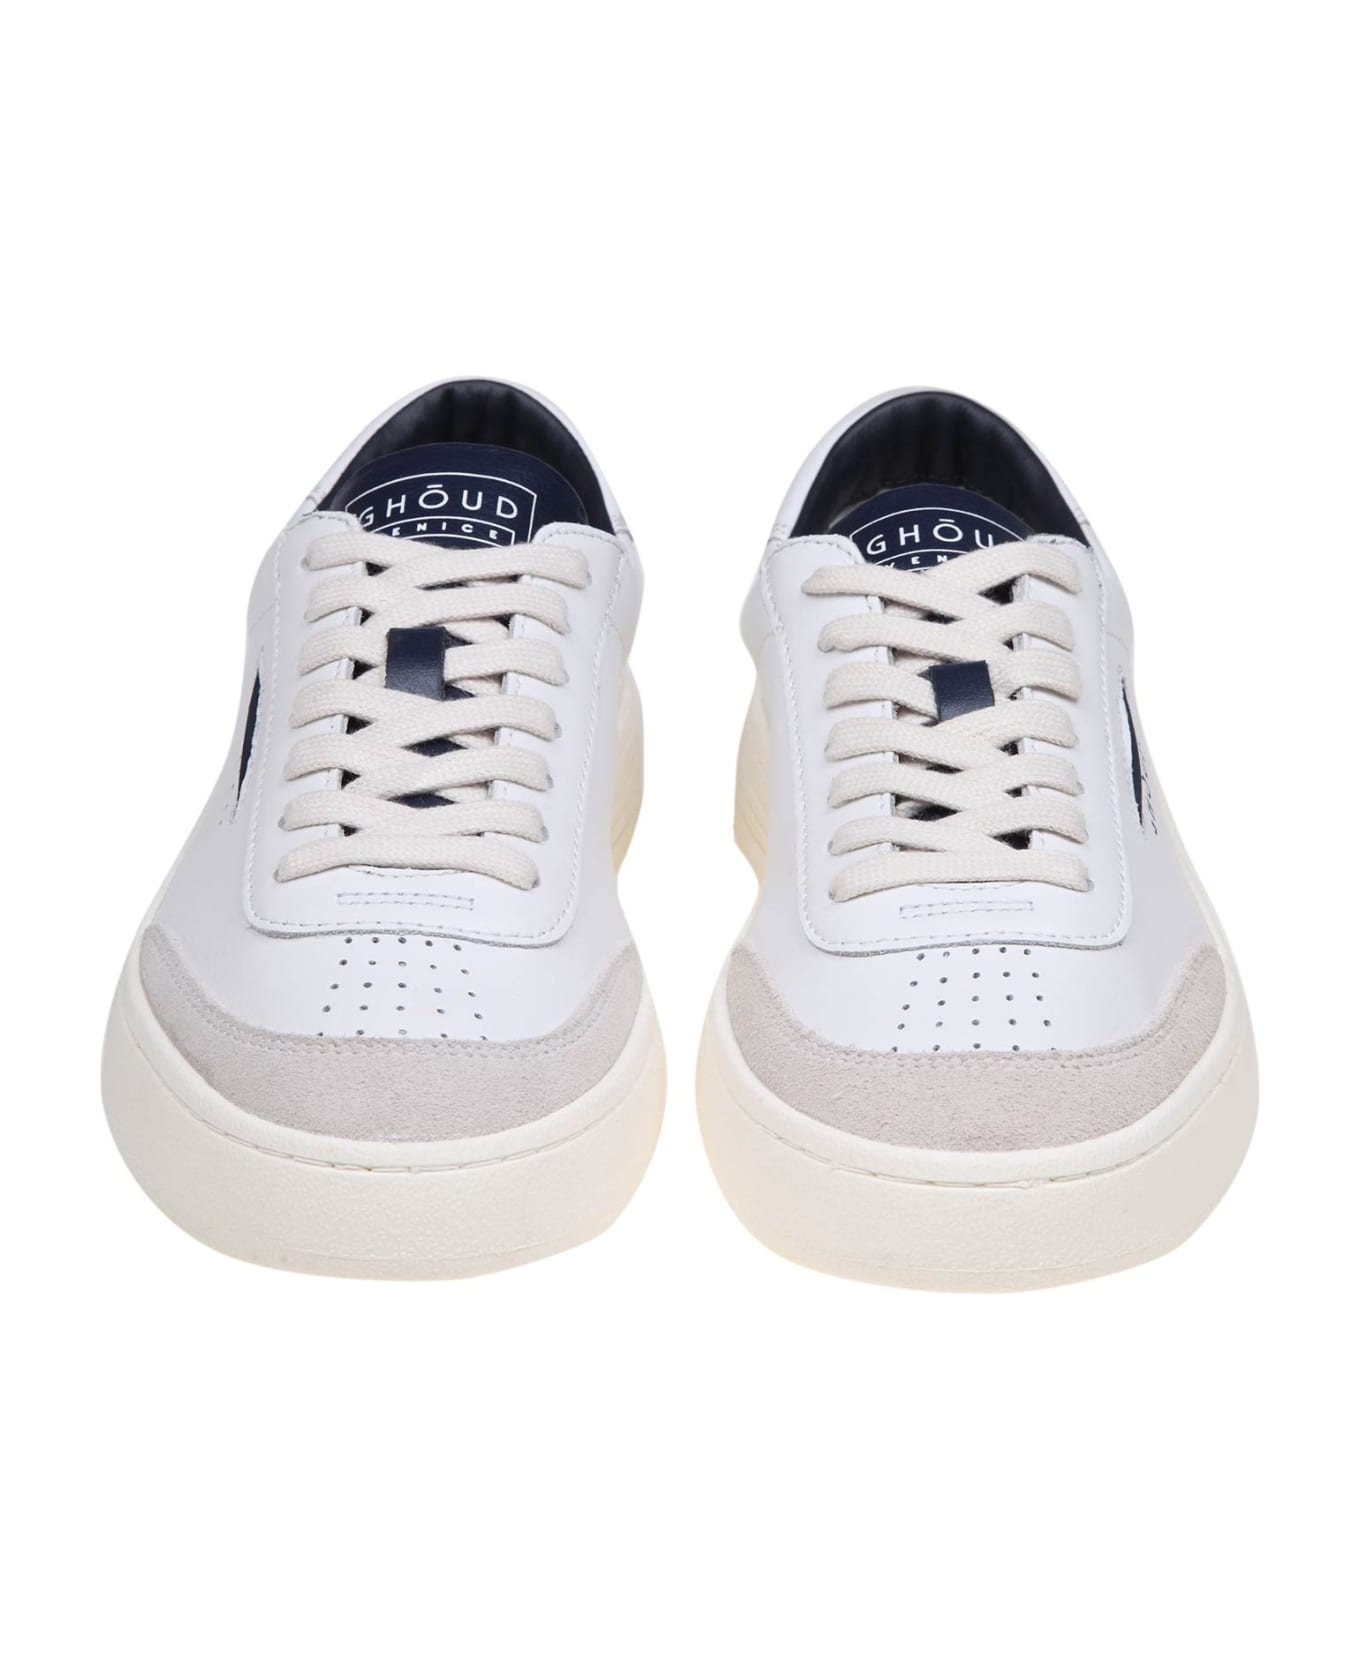 GHOUD Lido Low Sneakers In White/blue Leather And Suede - Blue